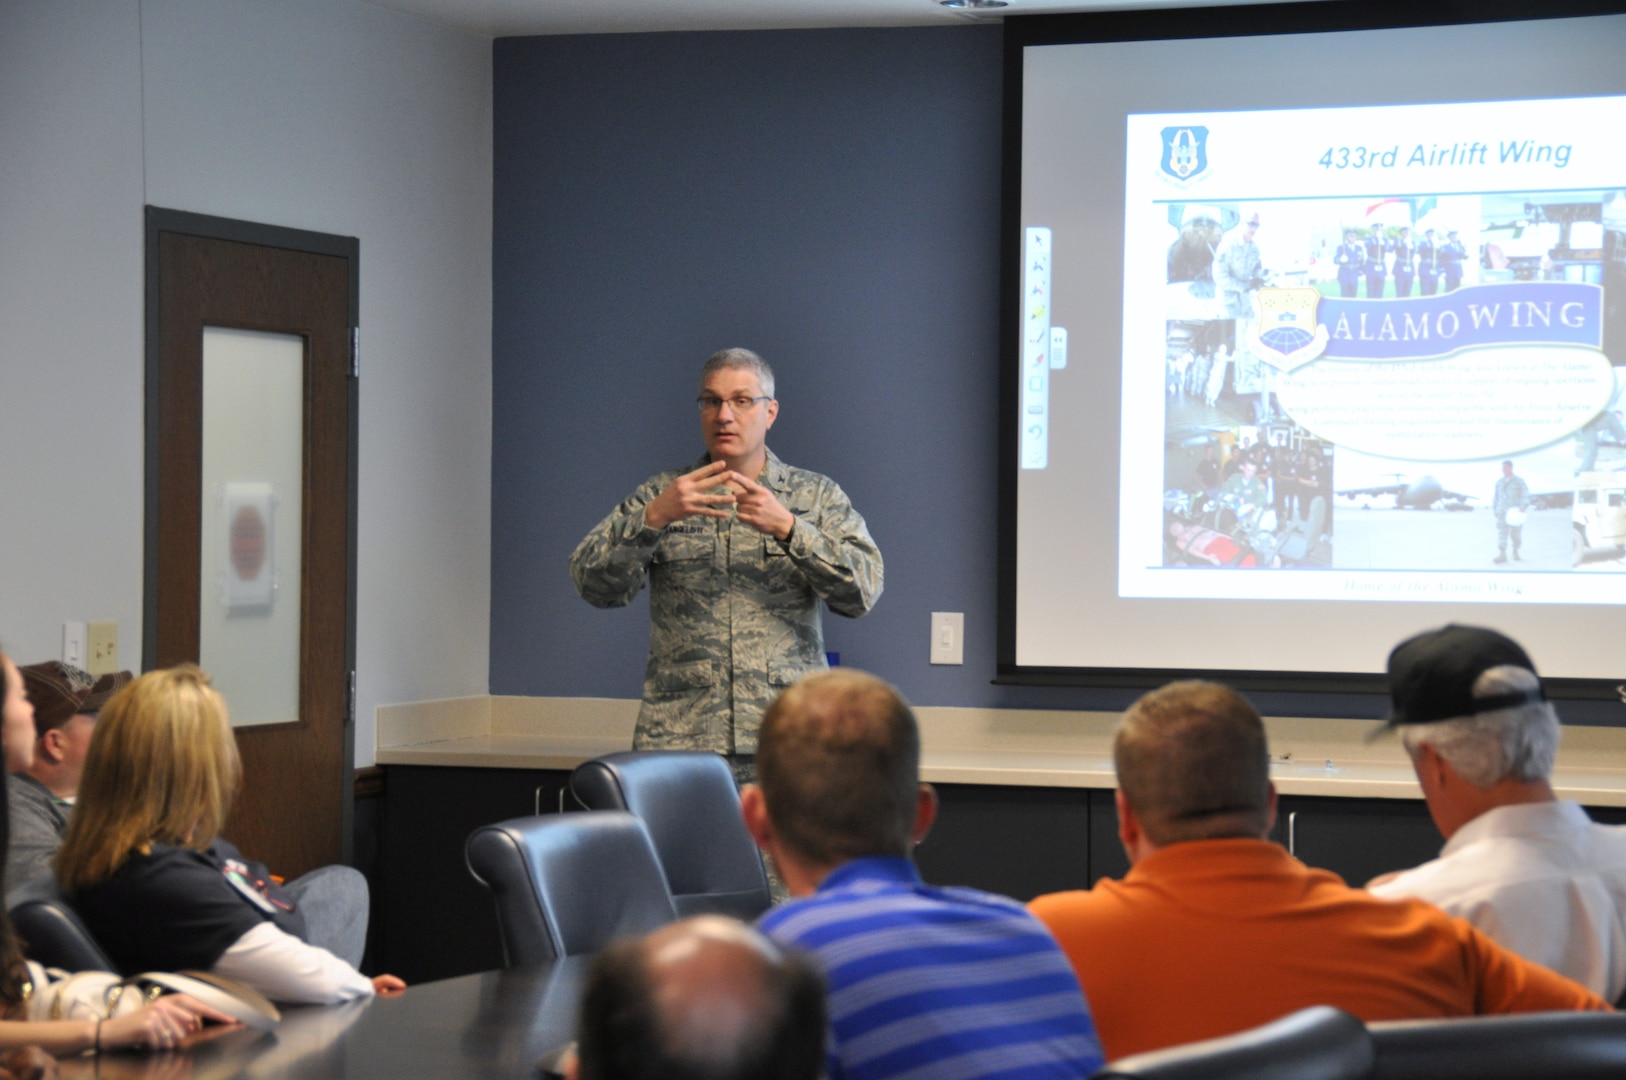 Col. Aaron Vangelisti, 433 Airlift Wing commander, Joint Base San Antonio-Lackland gives a mission briefing to civilian employers, March 8, 2014 at the 433rd headquarters building. The 433rd Airlift Wing hosts Employer Orientation Day annually to help civilian employers understand the requirements of their employee’s military Reserve duty. (U.S. Air Force photo by Tech Sgt. Carlos J. Trevino)